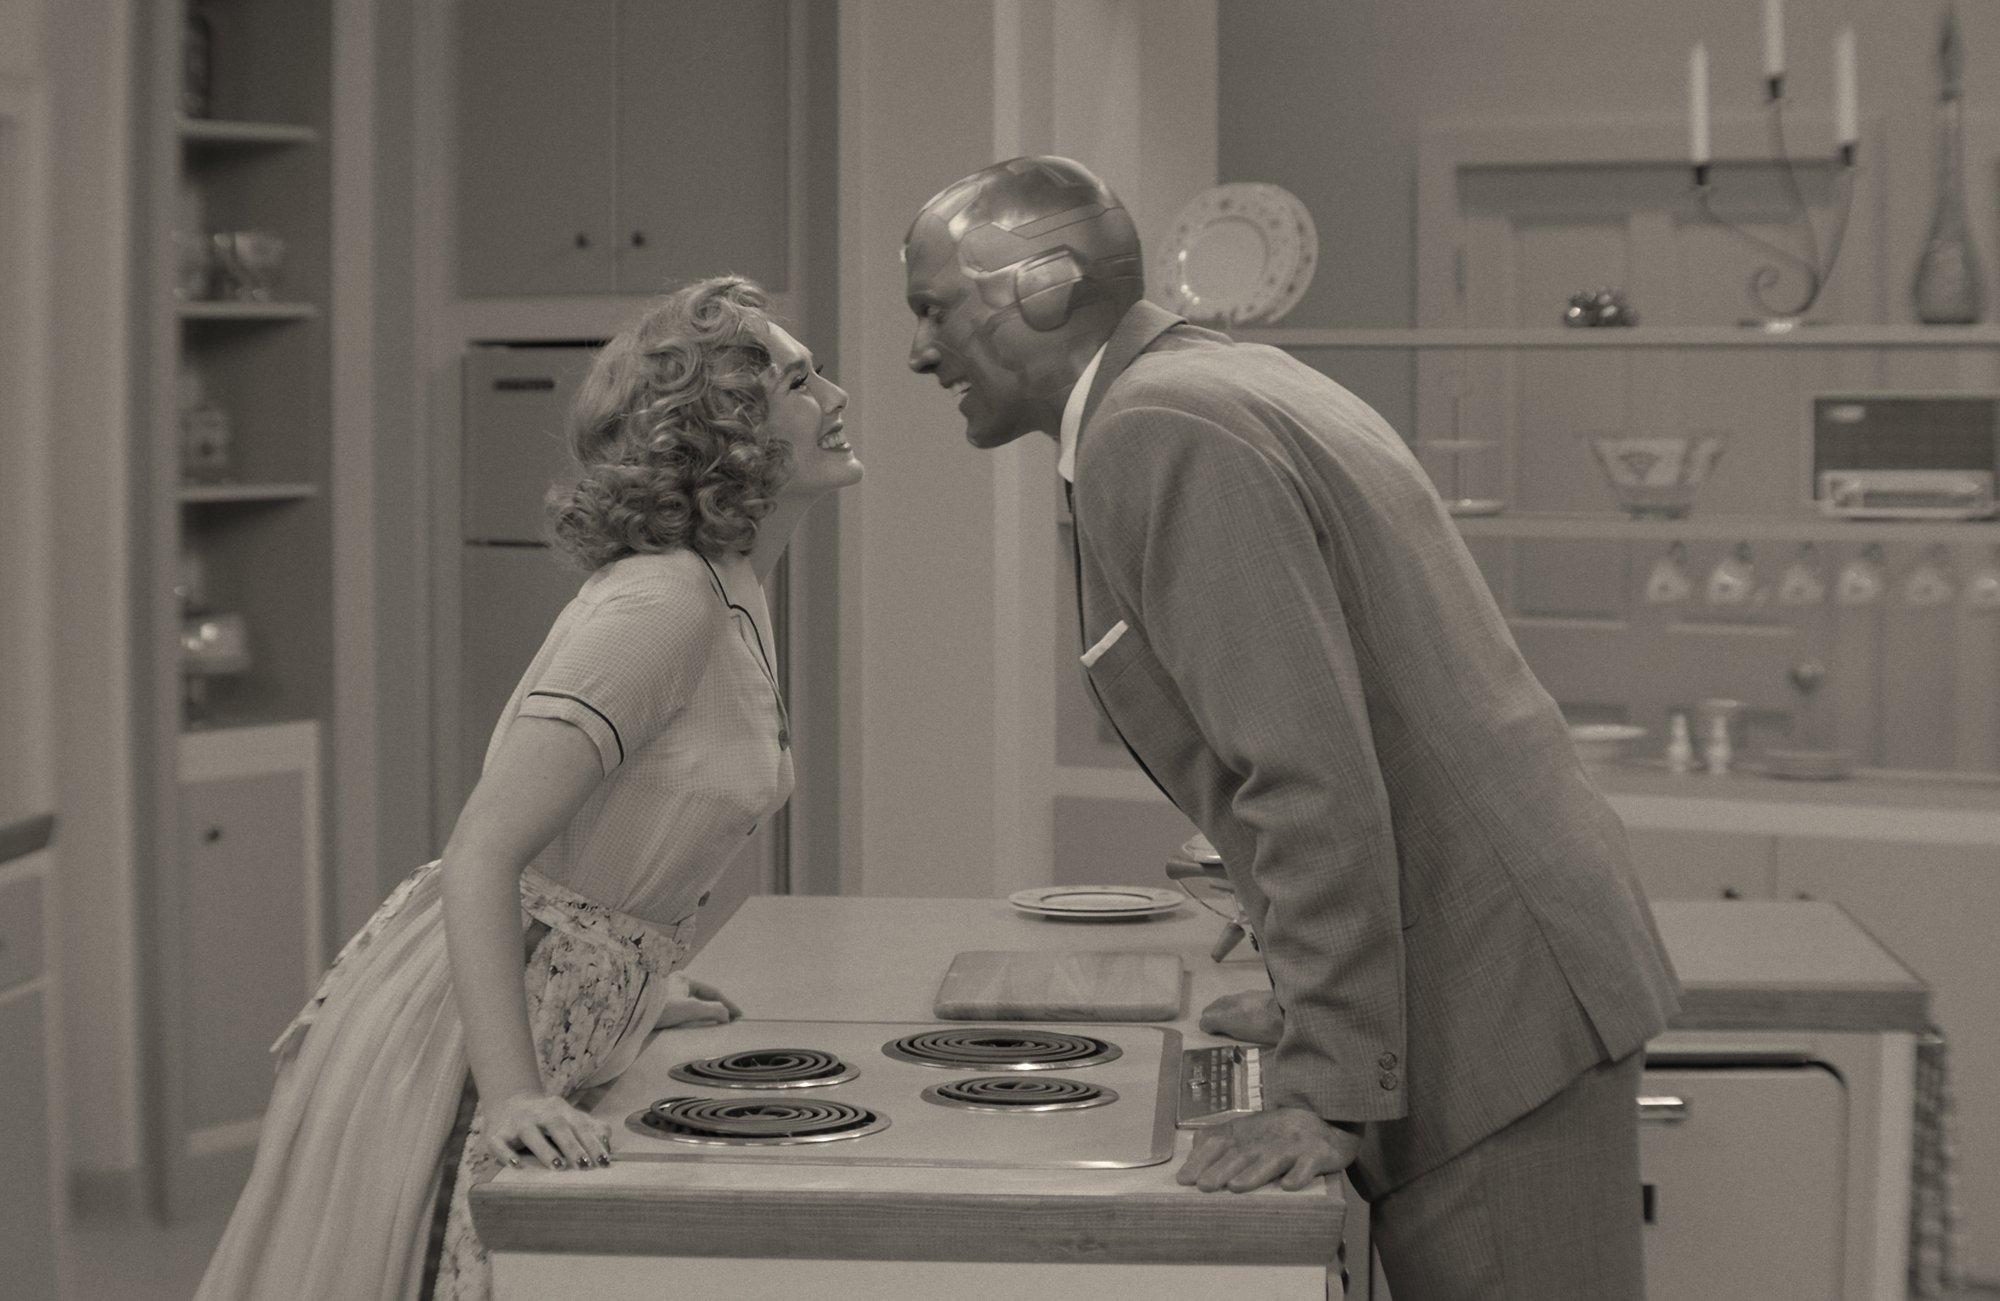 A black-and-white image of the 'WandaVision' premiere. Elizabeth Olsen's Wanda and Paul Bettany's Vision are leaning over a counter and look like they're about to kiss. Will 'WandaVision' take home any Emmys?